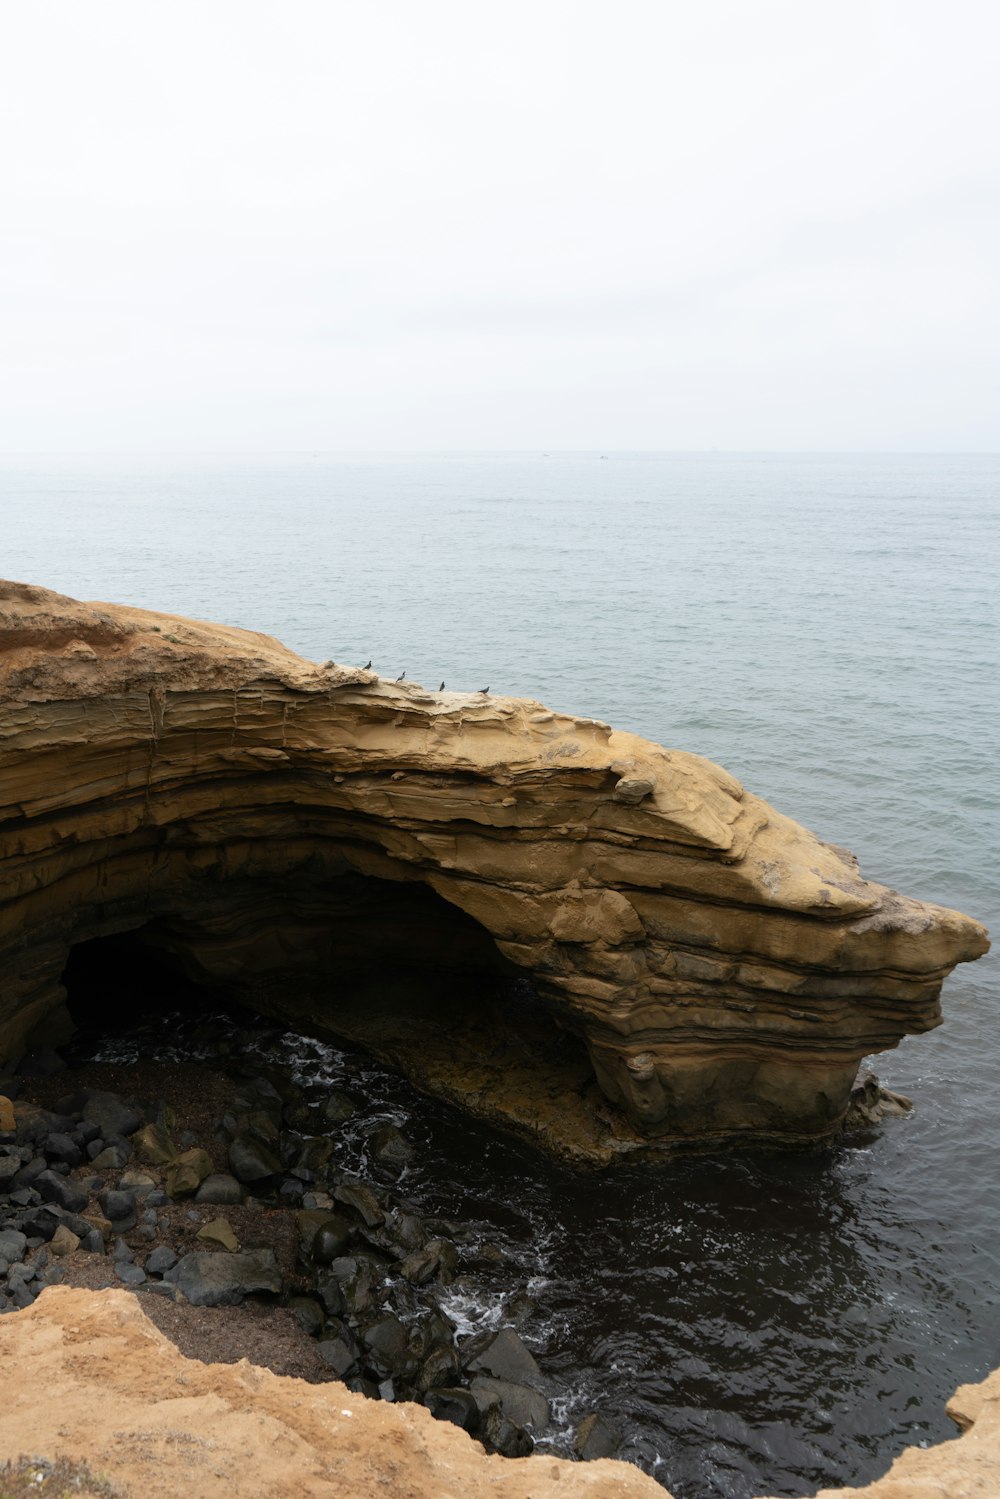 a large rock formation in the middle of a body of water